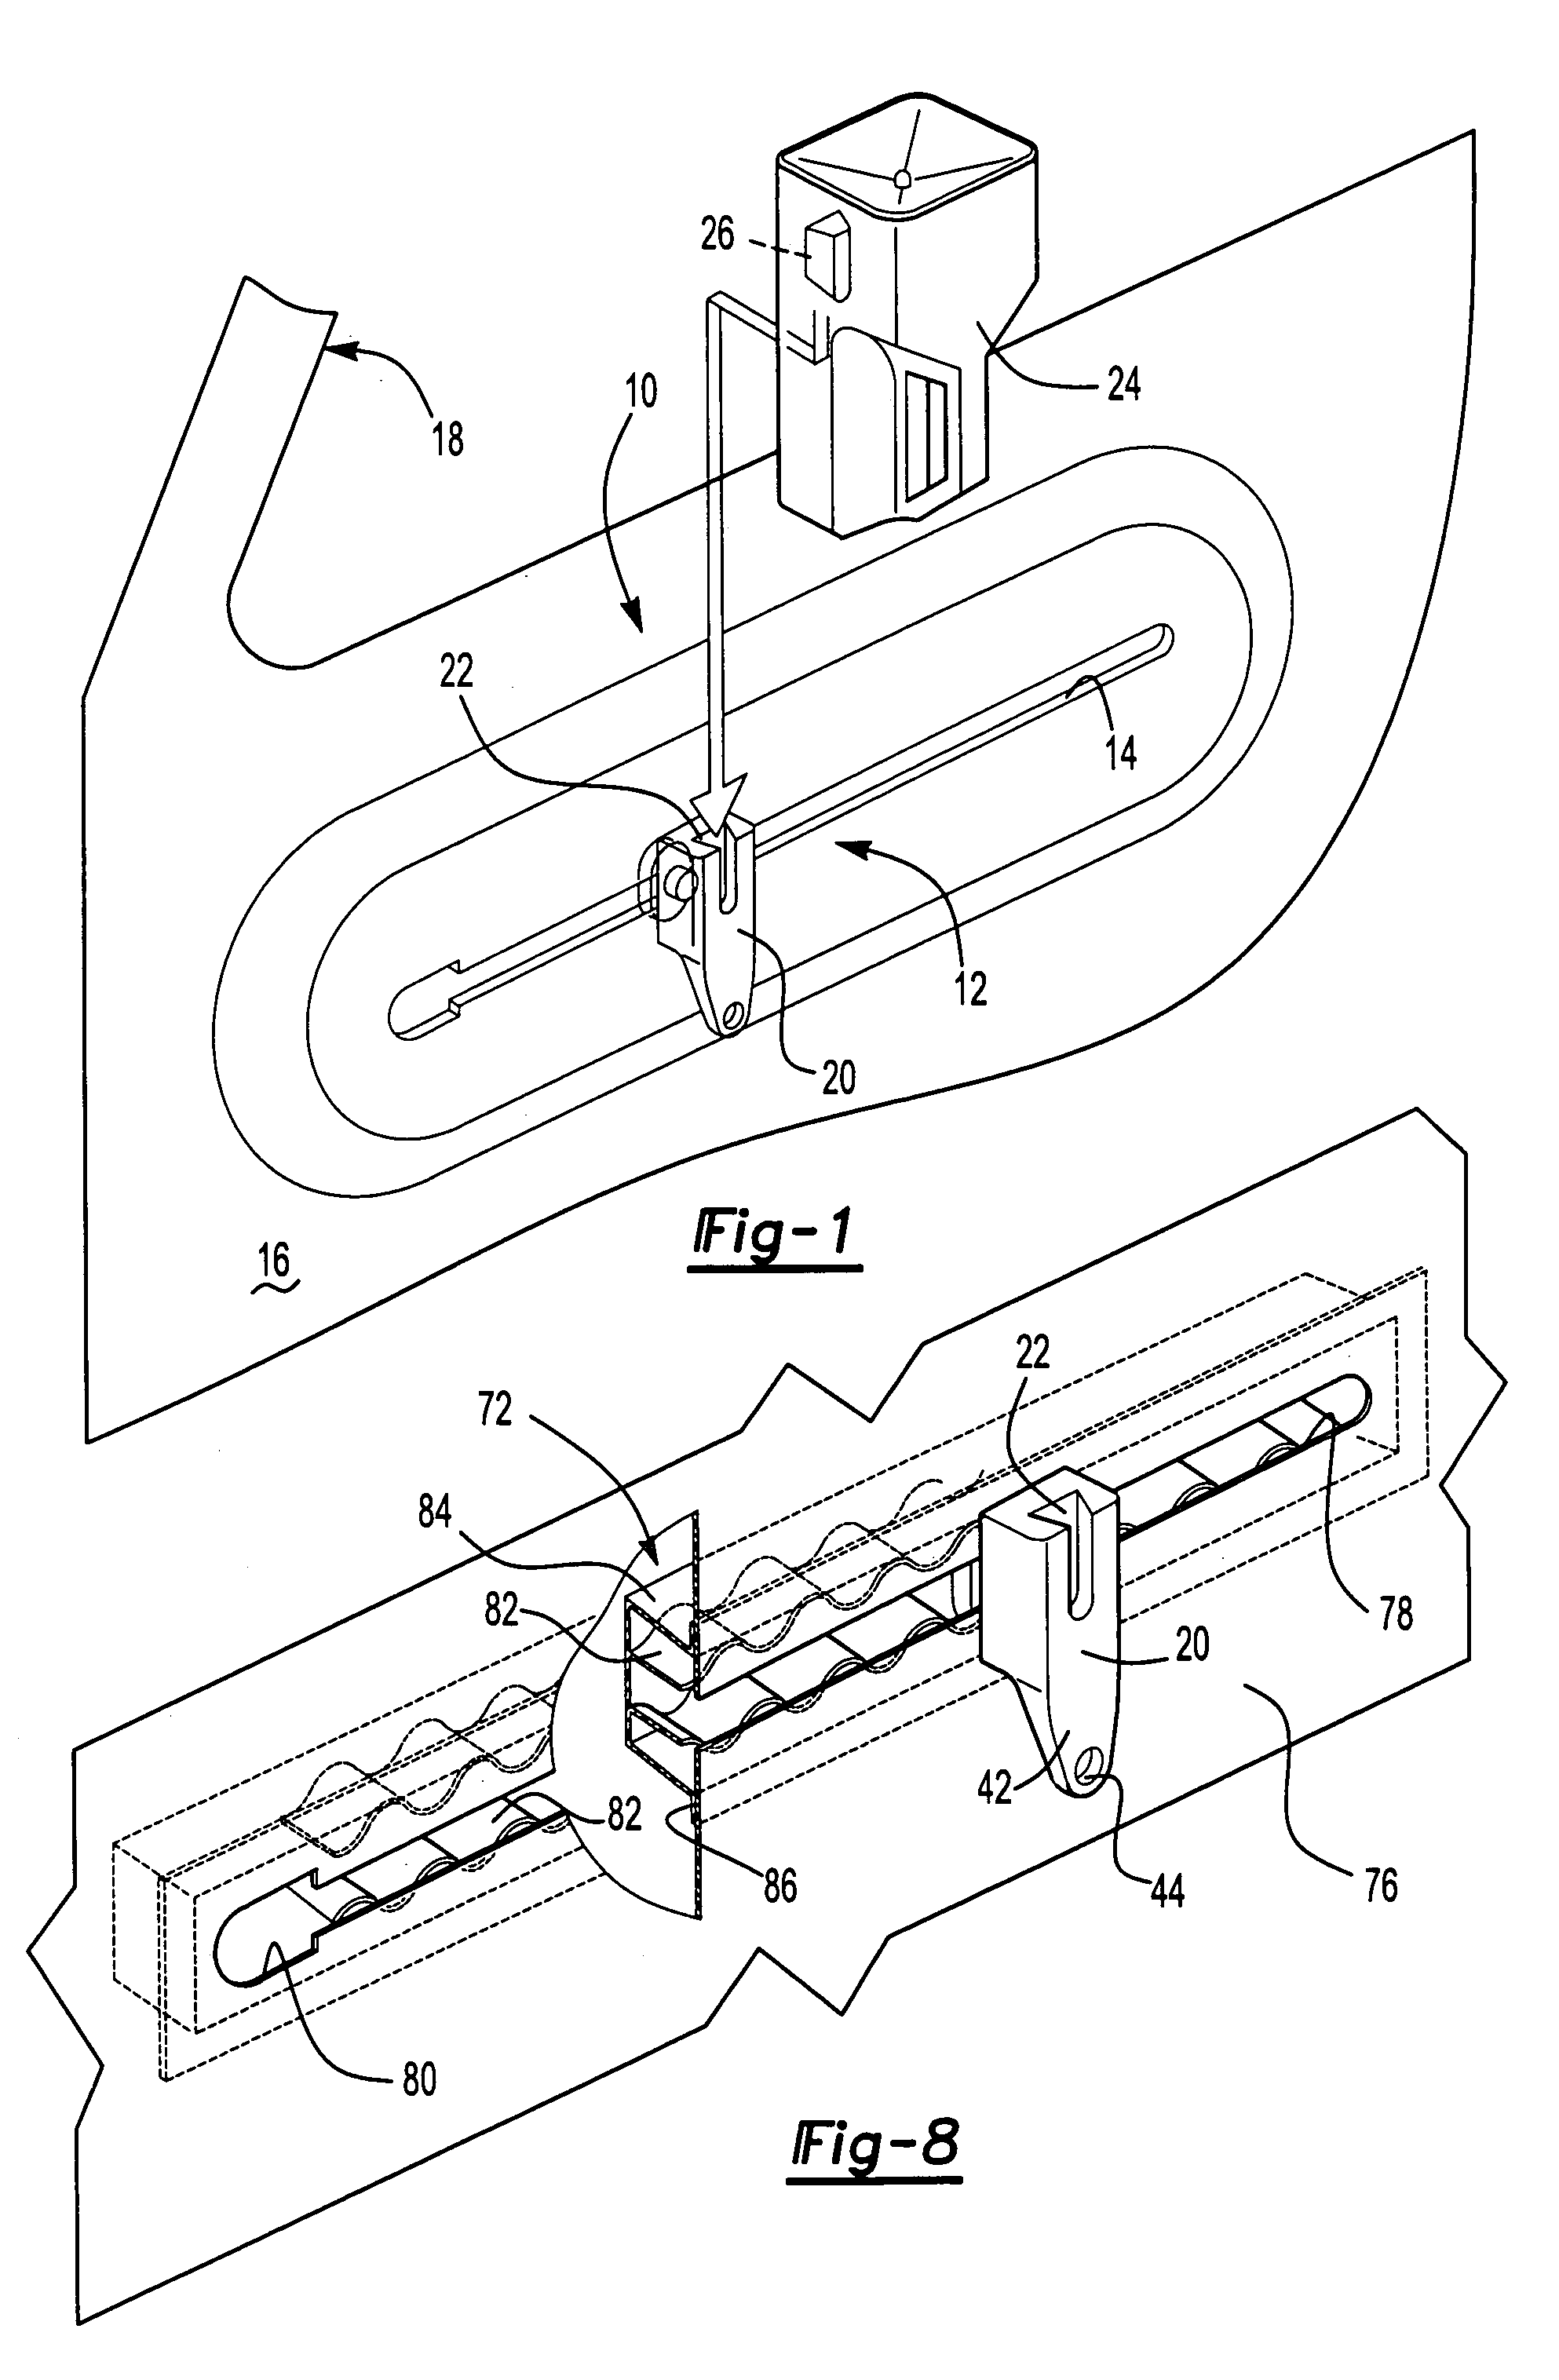 Accessory strip for securing articles within a vehicle interior